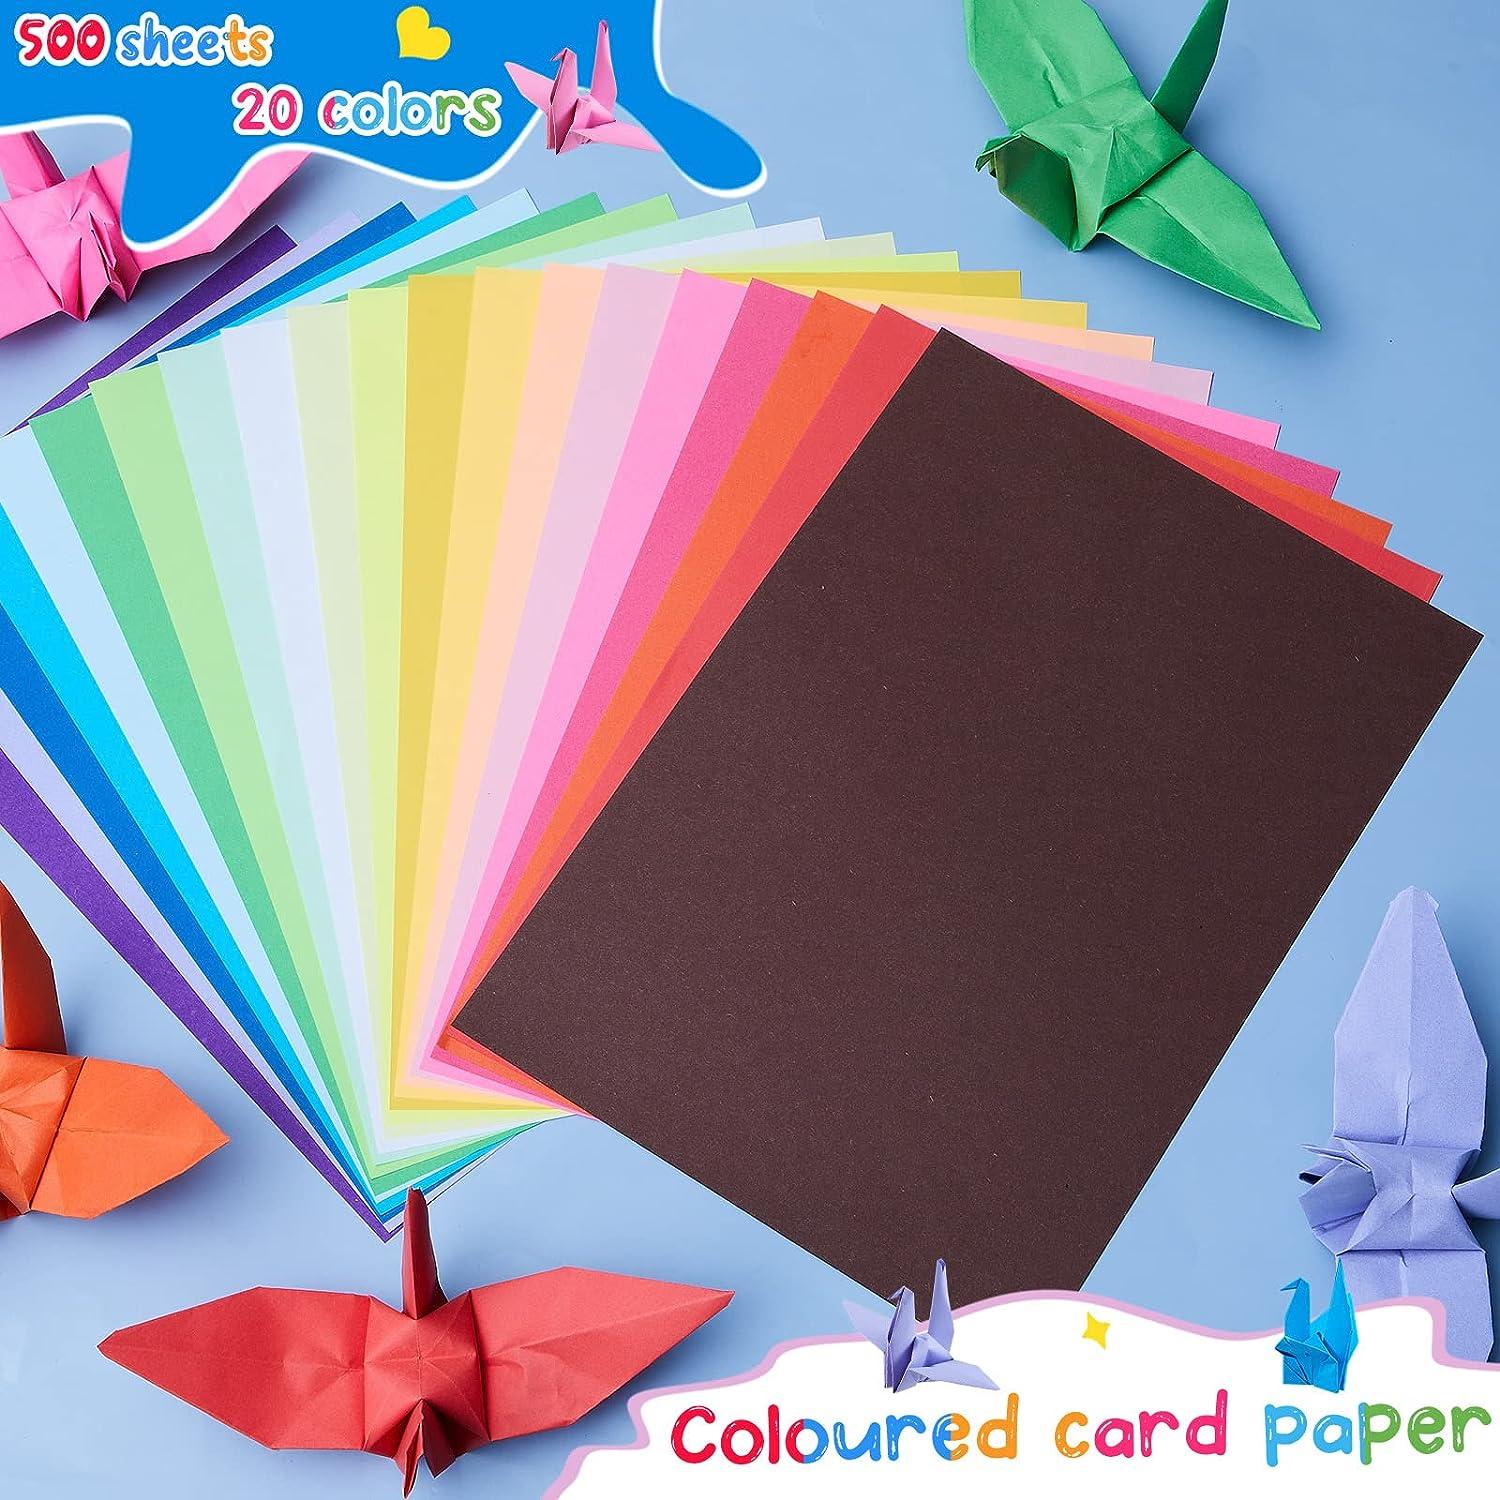 Colorations Construction Paper for Kids